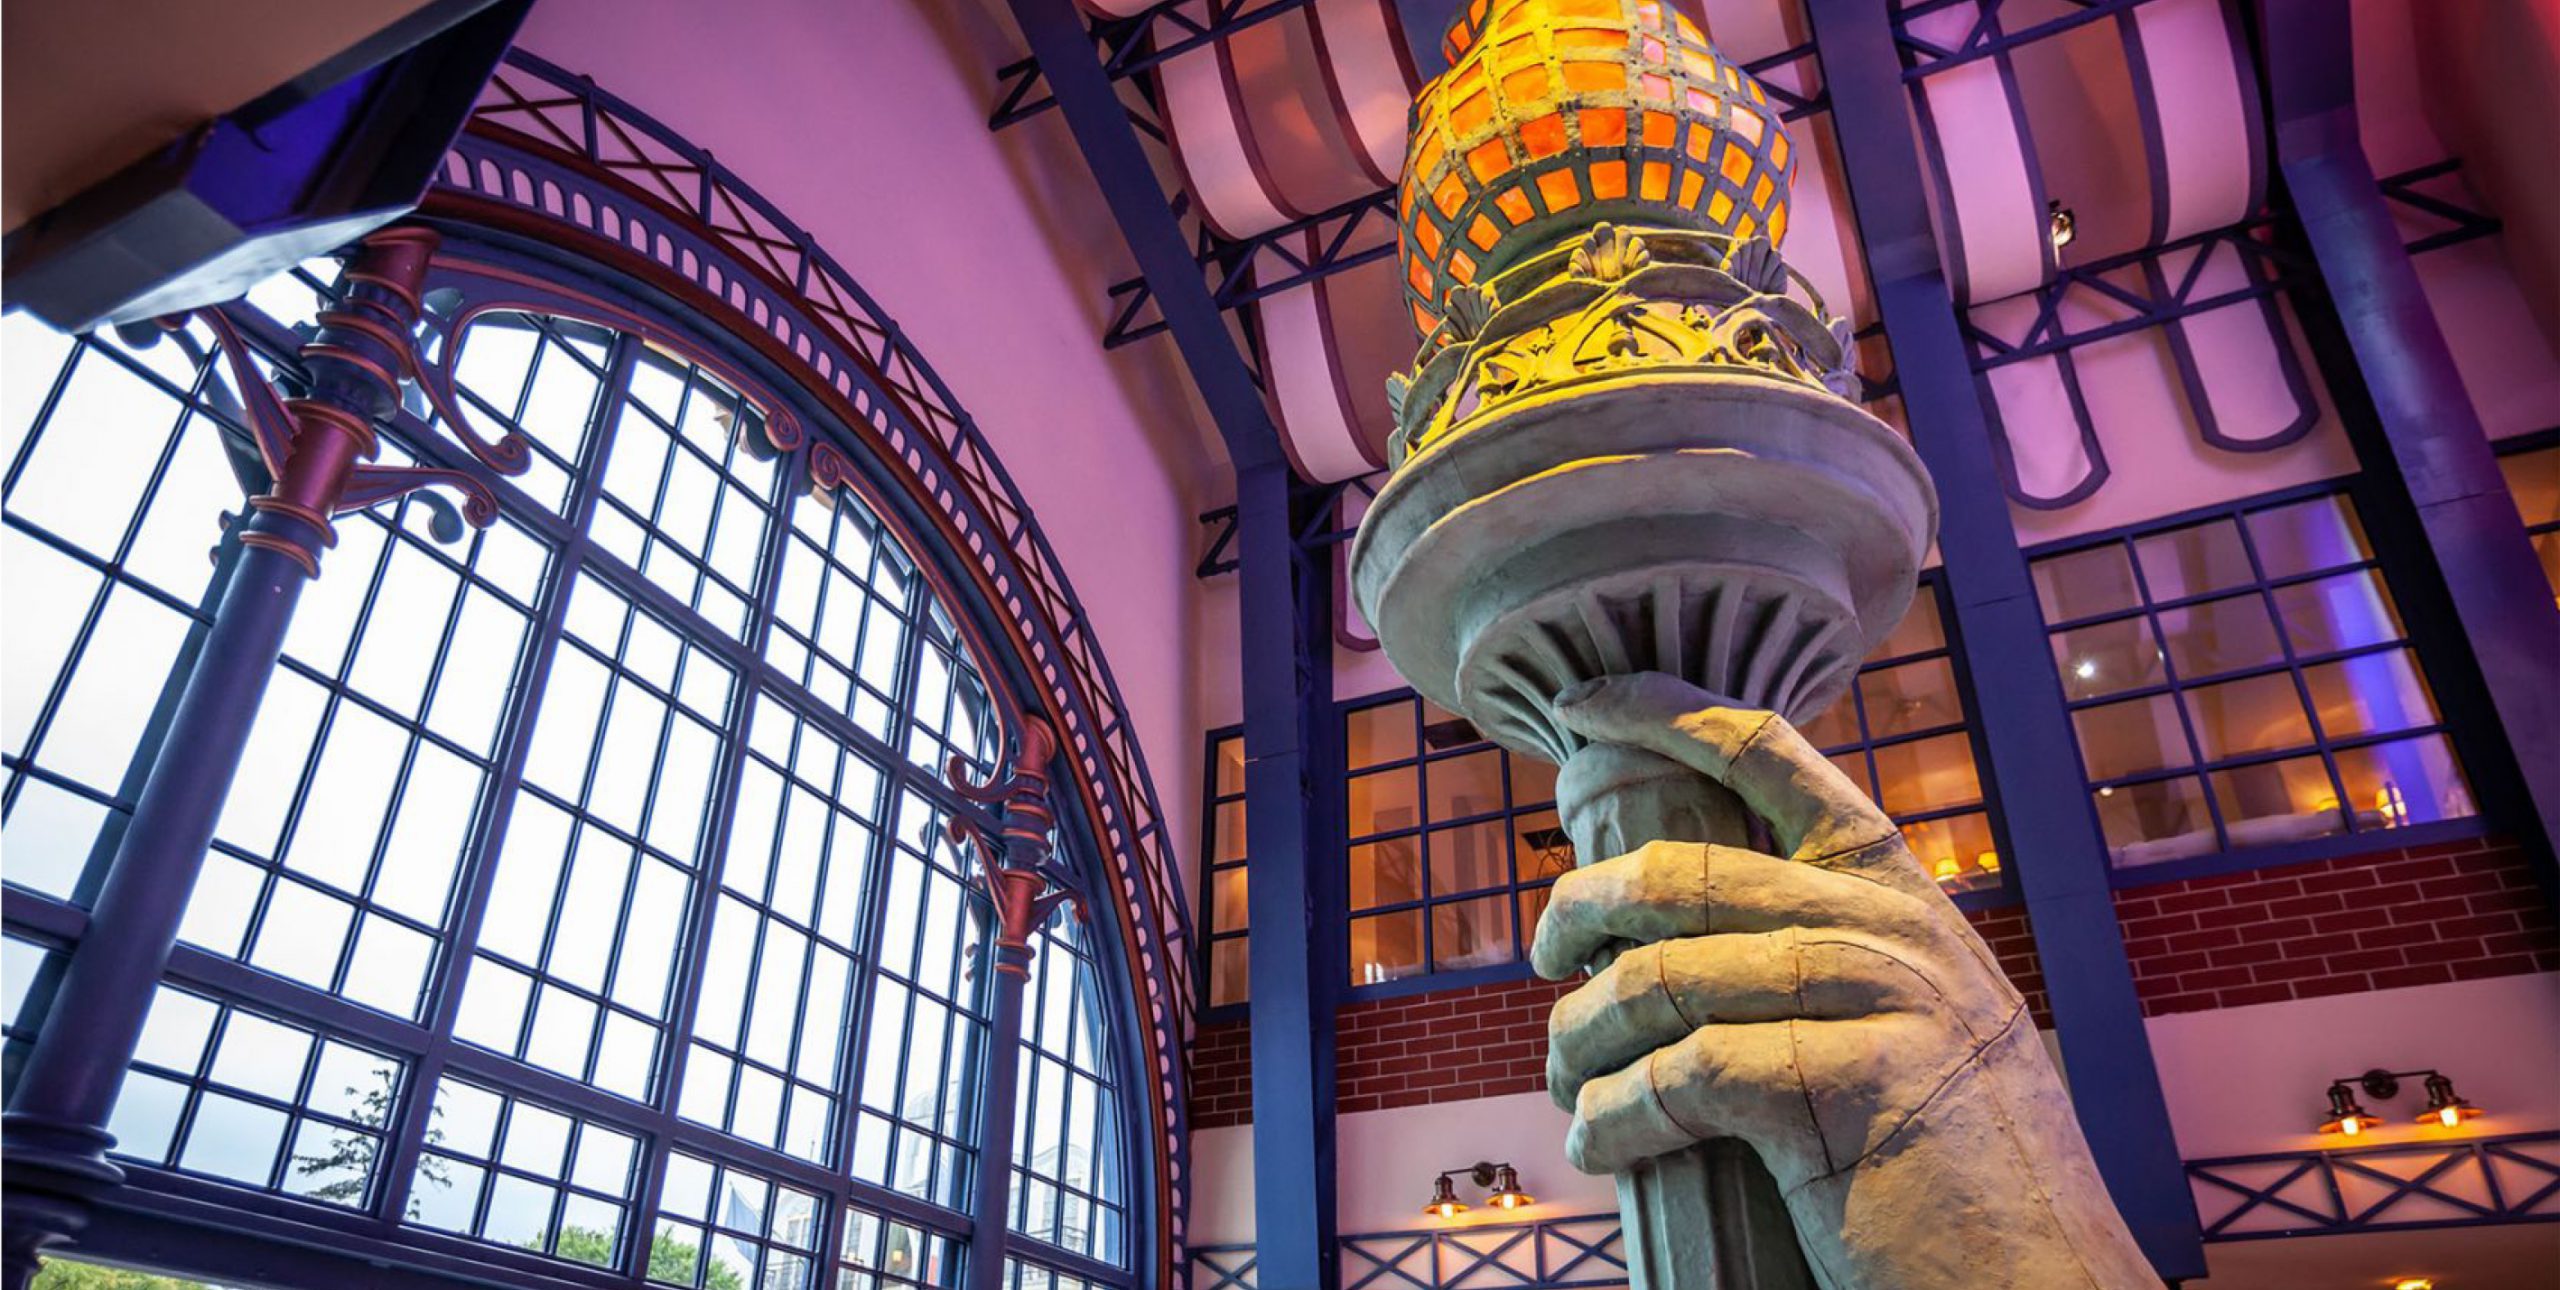 Staute of liberty hand and torch inside a building